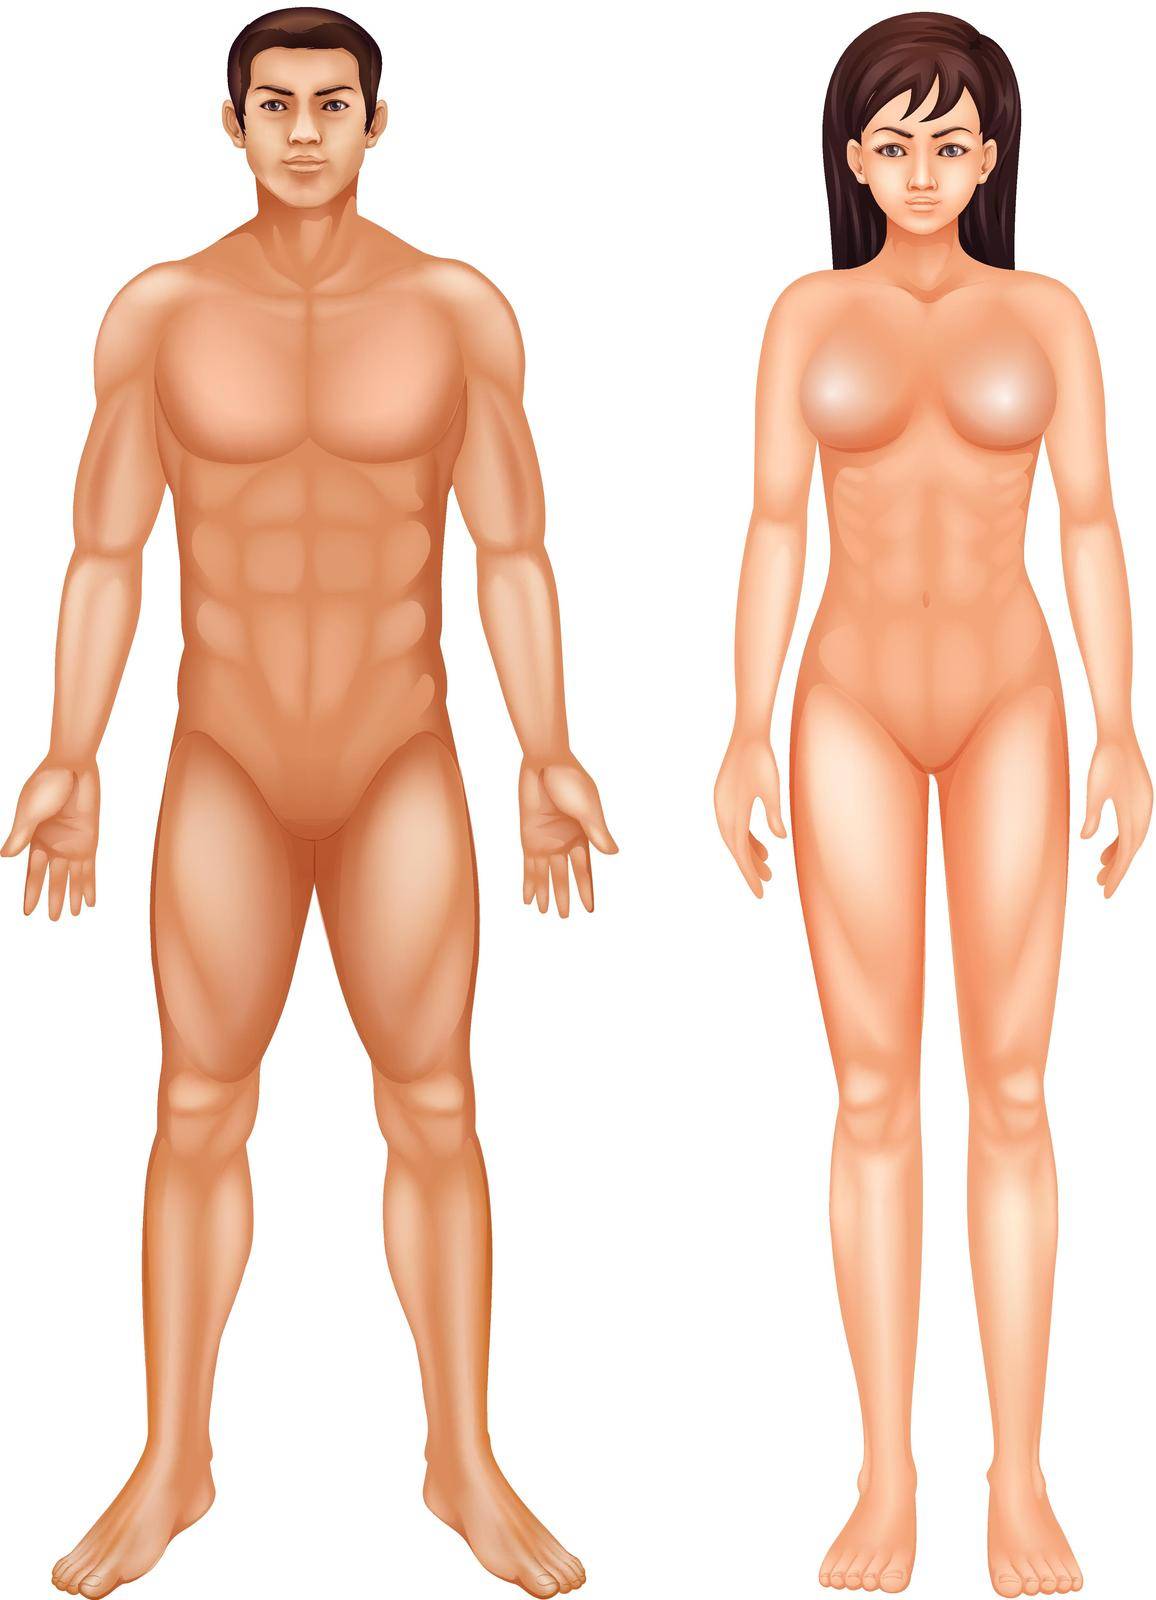 Illustration of the human body on a white background